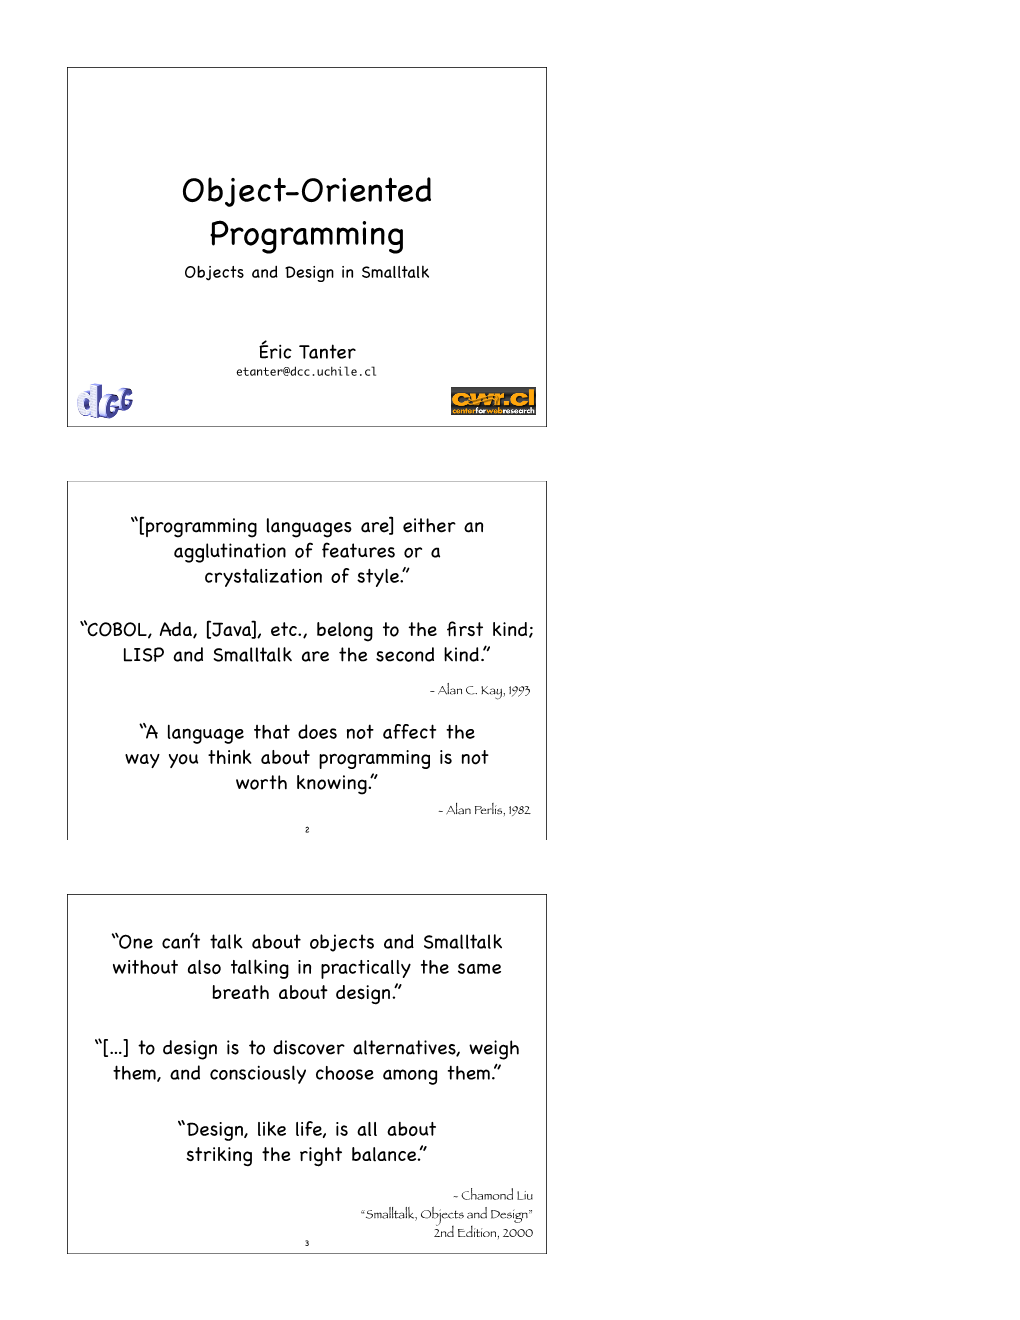 Object-Oriented Programming Objects and Design in Smalltalk